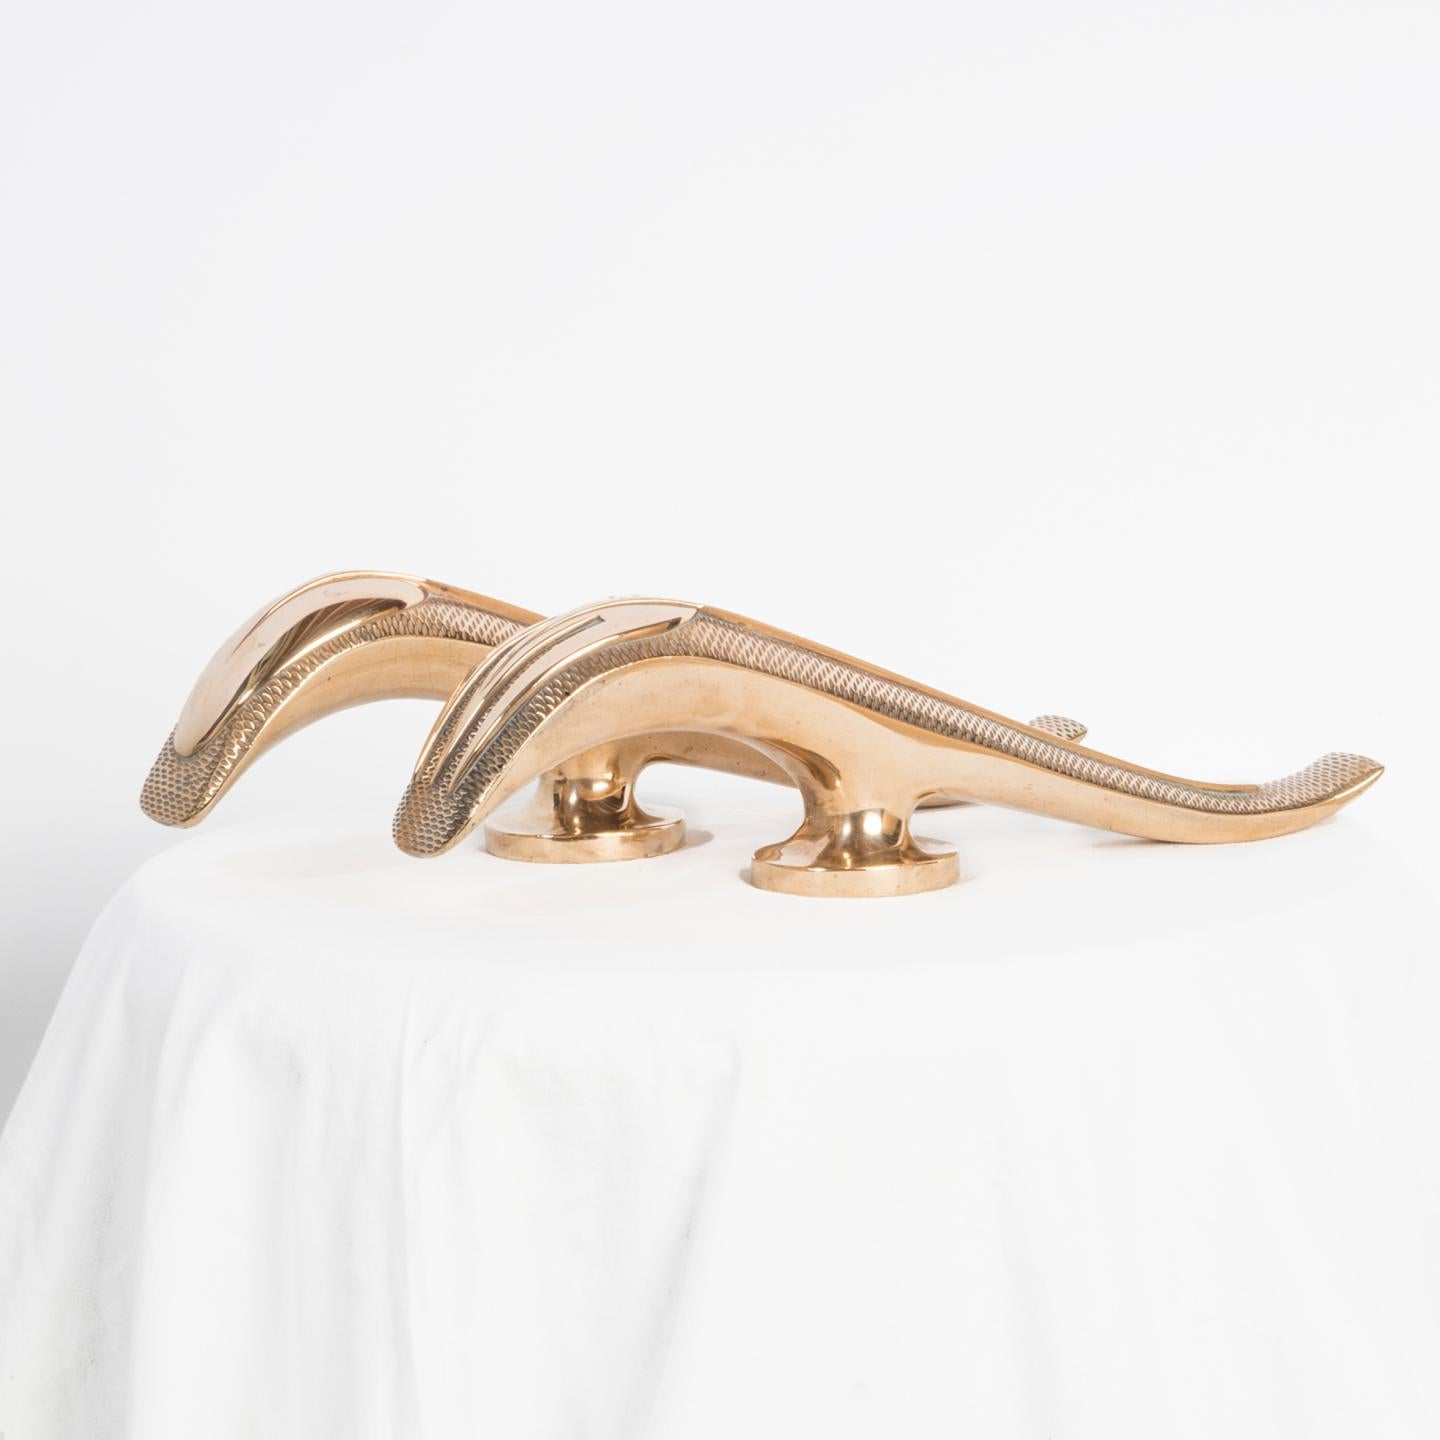 A stunning set of exquisite large and heavy French Art Deco door handles, most likely utilized for restaurant entrances, showcasing an elegant spoon and fork design.

Crafted from solid brass, these handles carry a substantial weight and showcase a